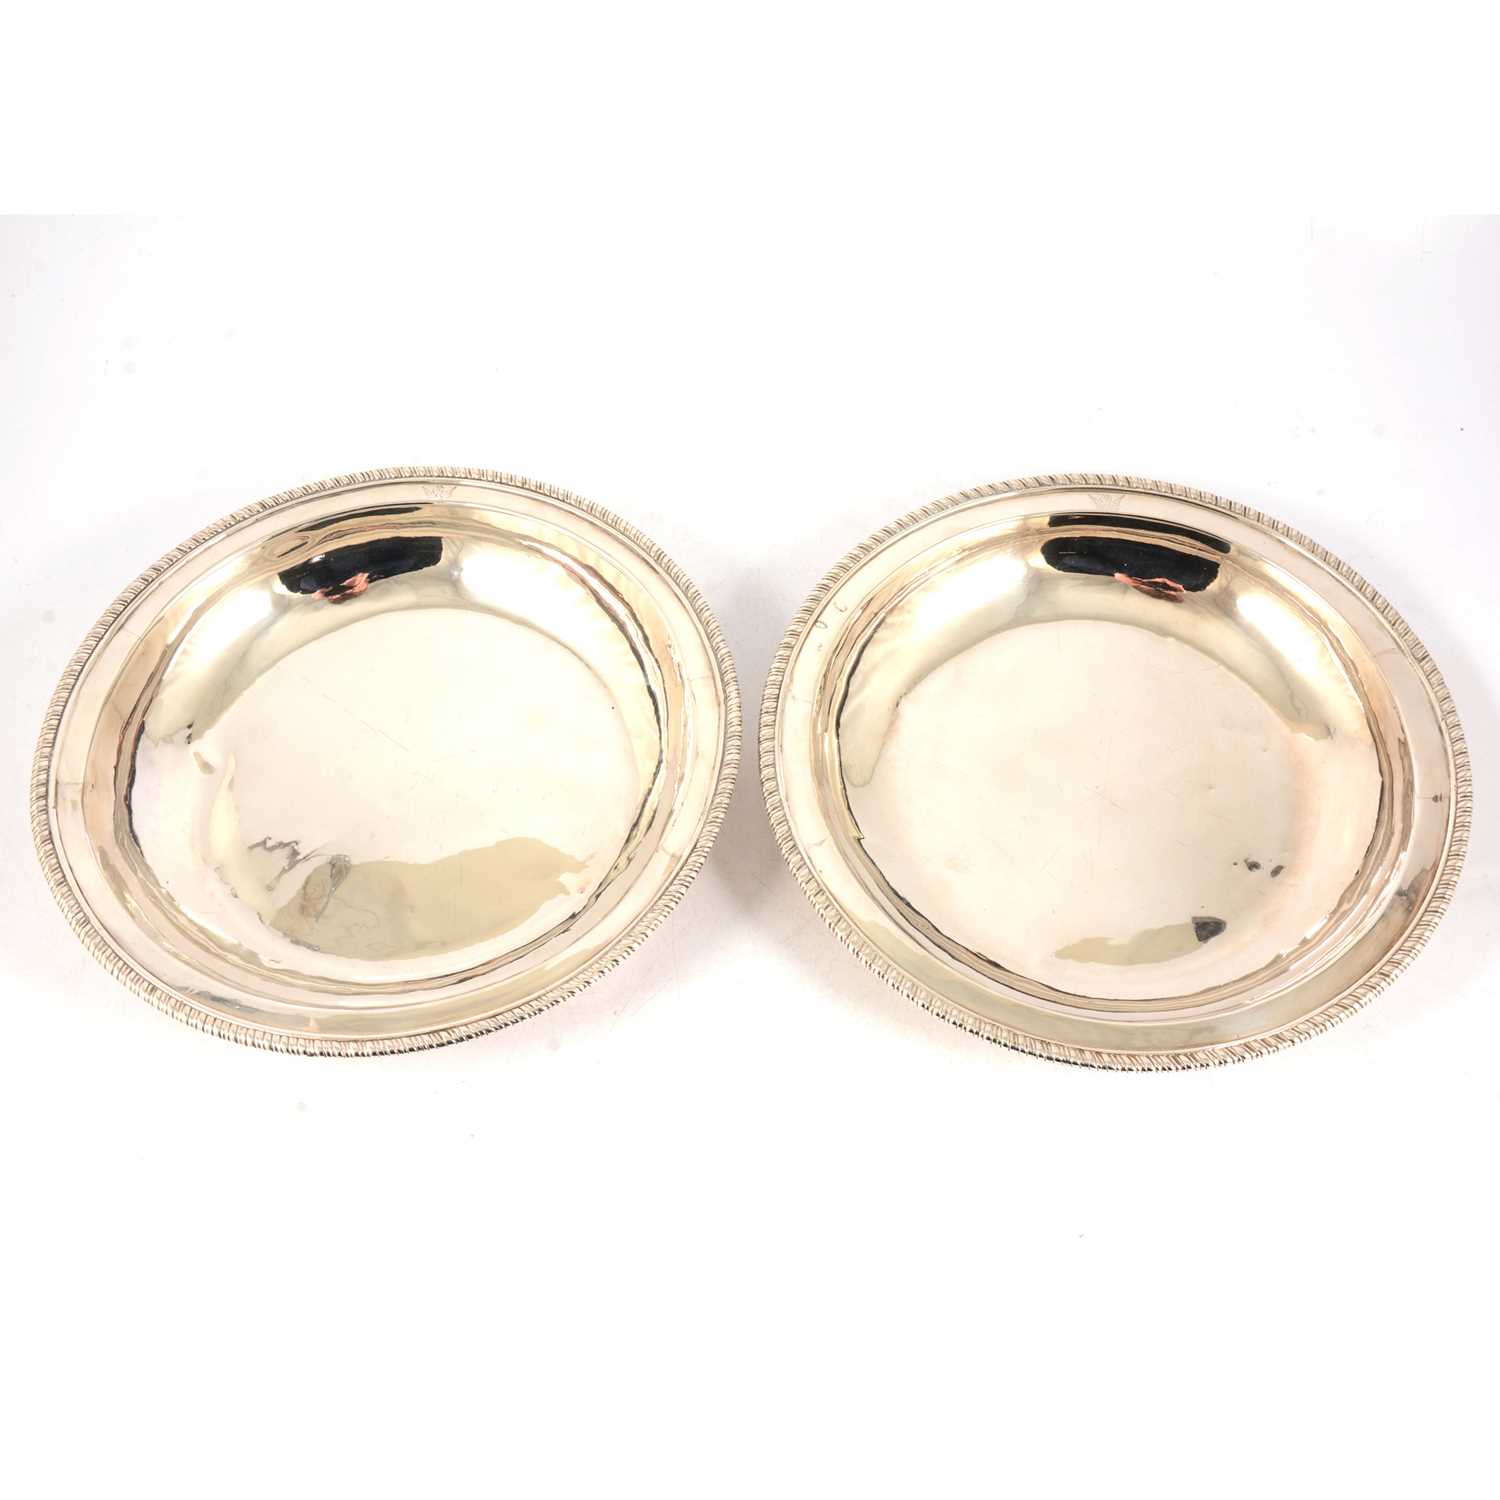 Lot 44 - Pair of Irish silver dishes, marks worn